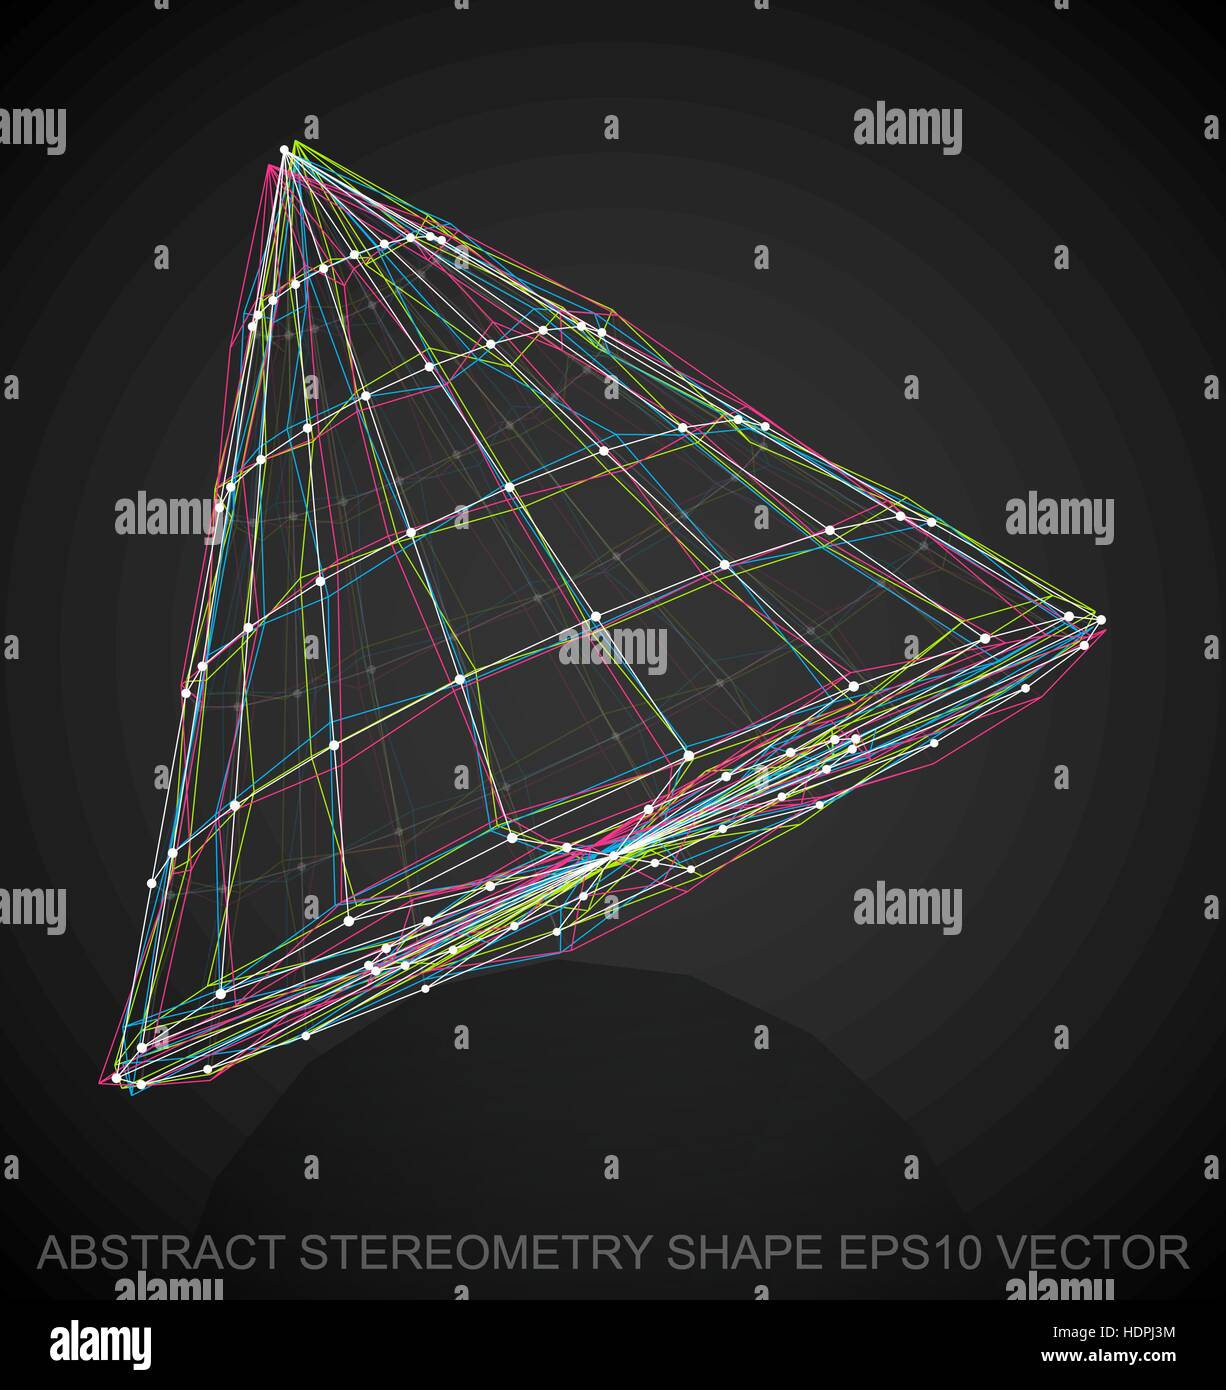 Abstract stereometry shape: Multicolor sketched Cone with Reflection ...